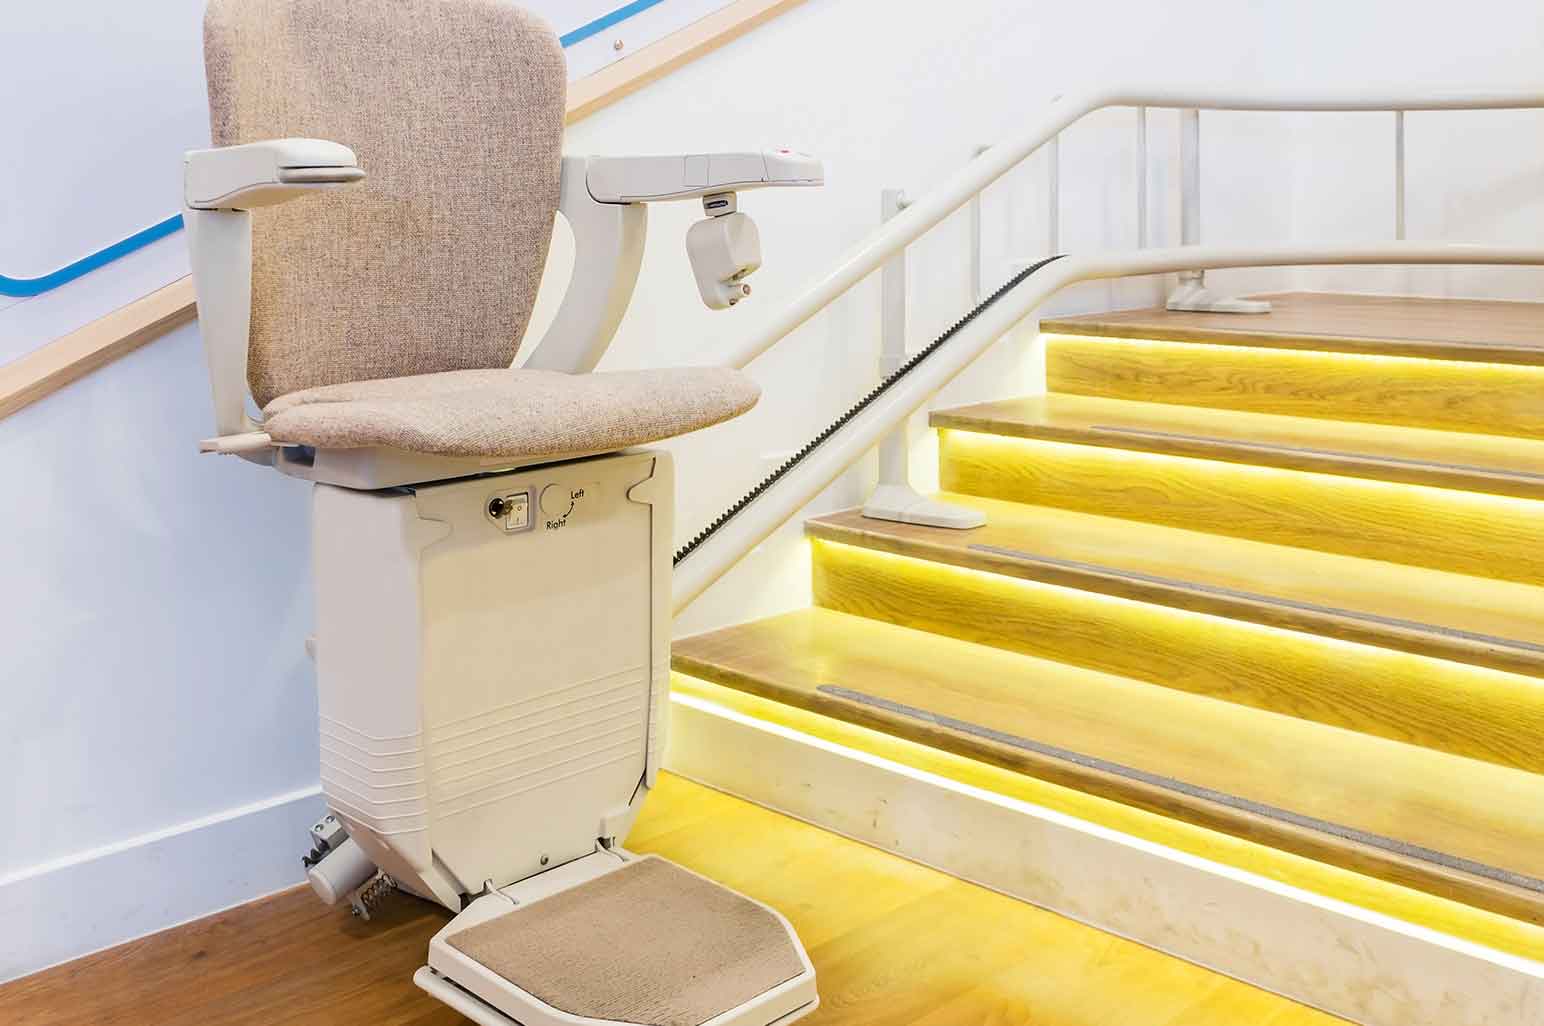 Planning To Buy A Stairlift? Here's What To Consider